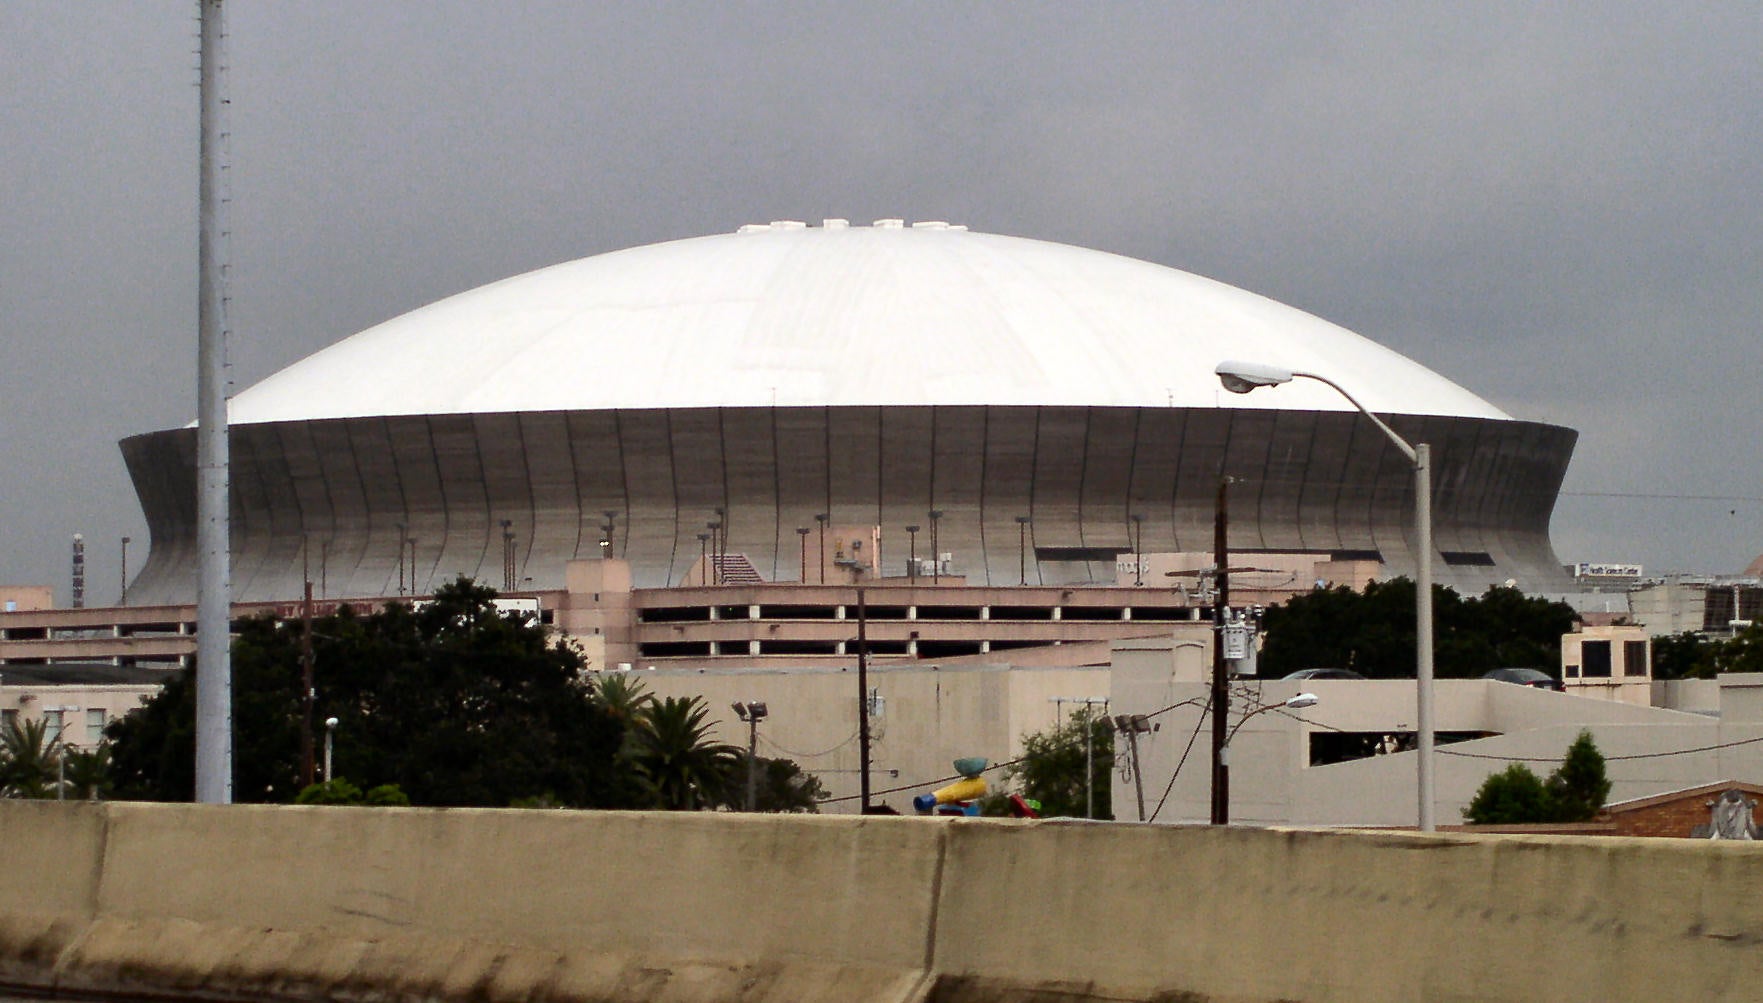 T-Mobile has improved its network for better coverage inside and outside the Superdome - T-Mobile expands its 4G coverage in time for the Super Bowl and Mardi Gras